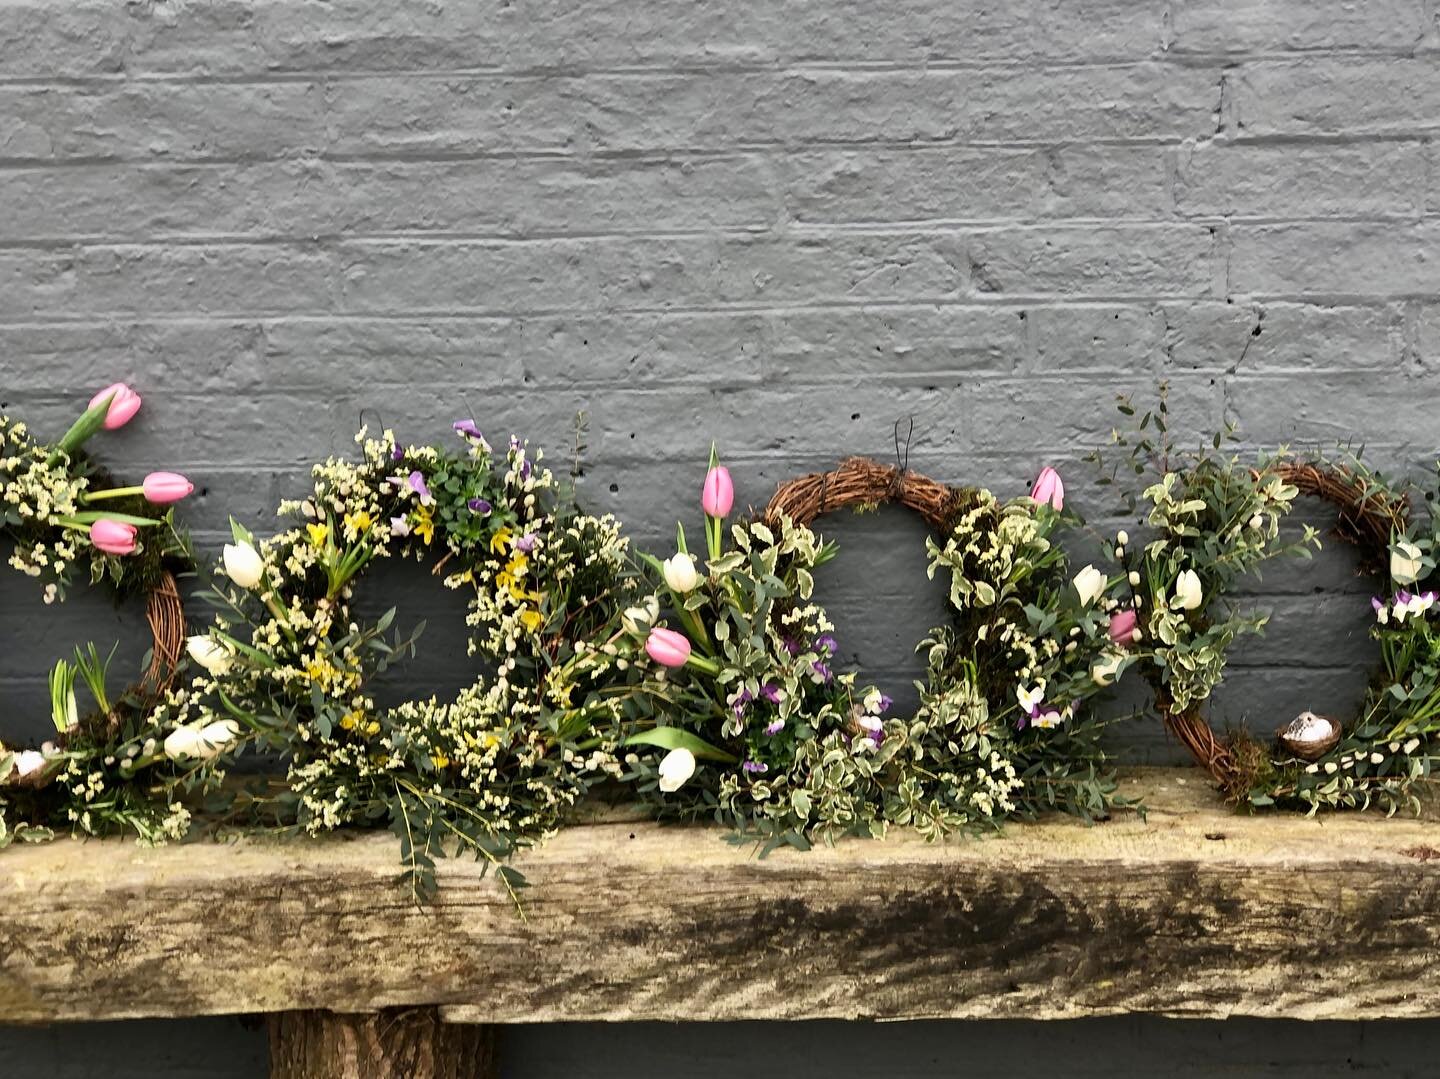 On Friday I taught a workshop at a local vineyard I&rsquo;ve worked with for a few years 💚 @arteliumwine in Streat near Ditchling. 

We used the cosy tasting room behind the bar and created spring living eco wreaths on a grapevine base. By eco I mea